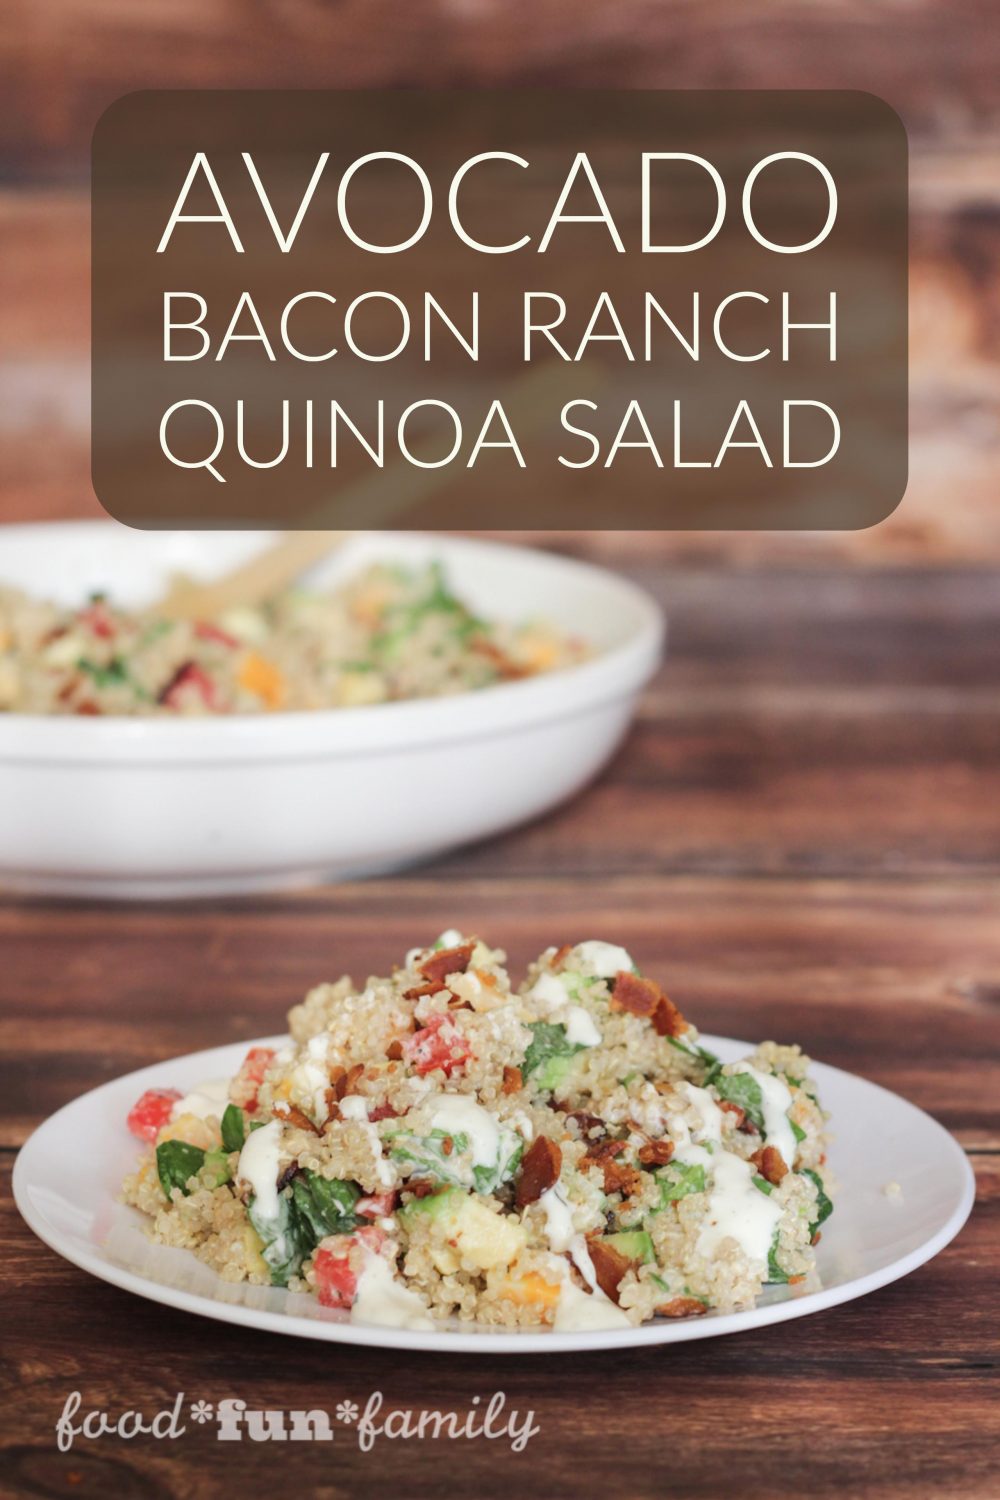 Avocado Bacon Ranch Quinoa Salad - a delicious cold "loaded" quinoa salad that is perfect for summer time gatherings and barbecues